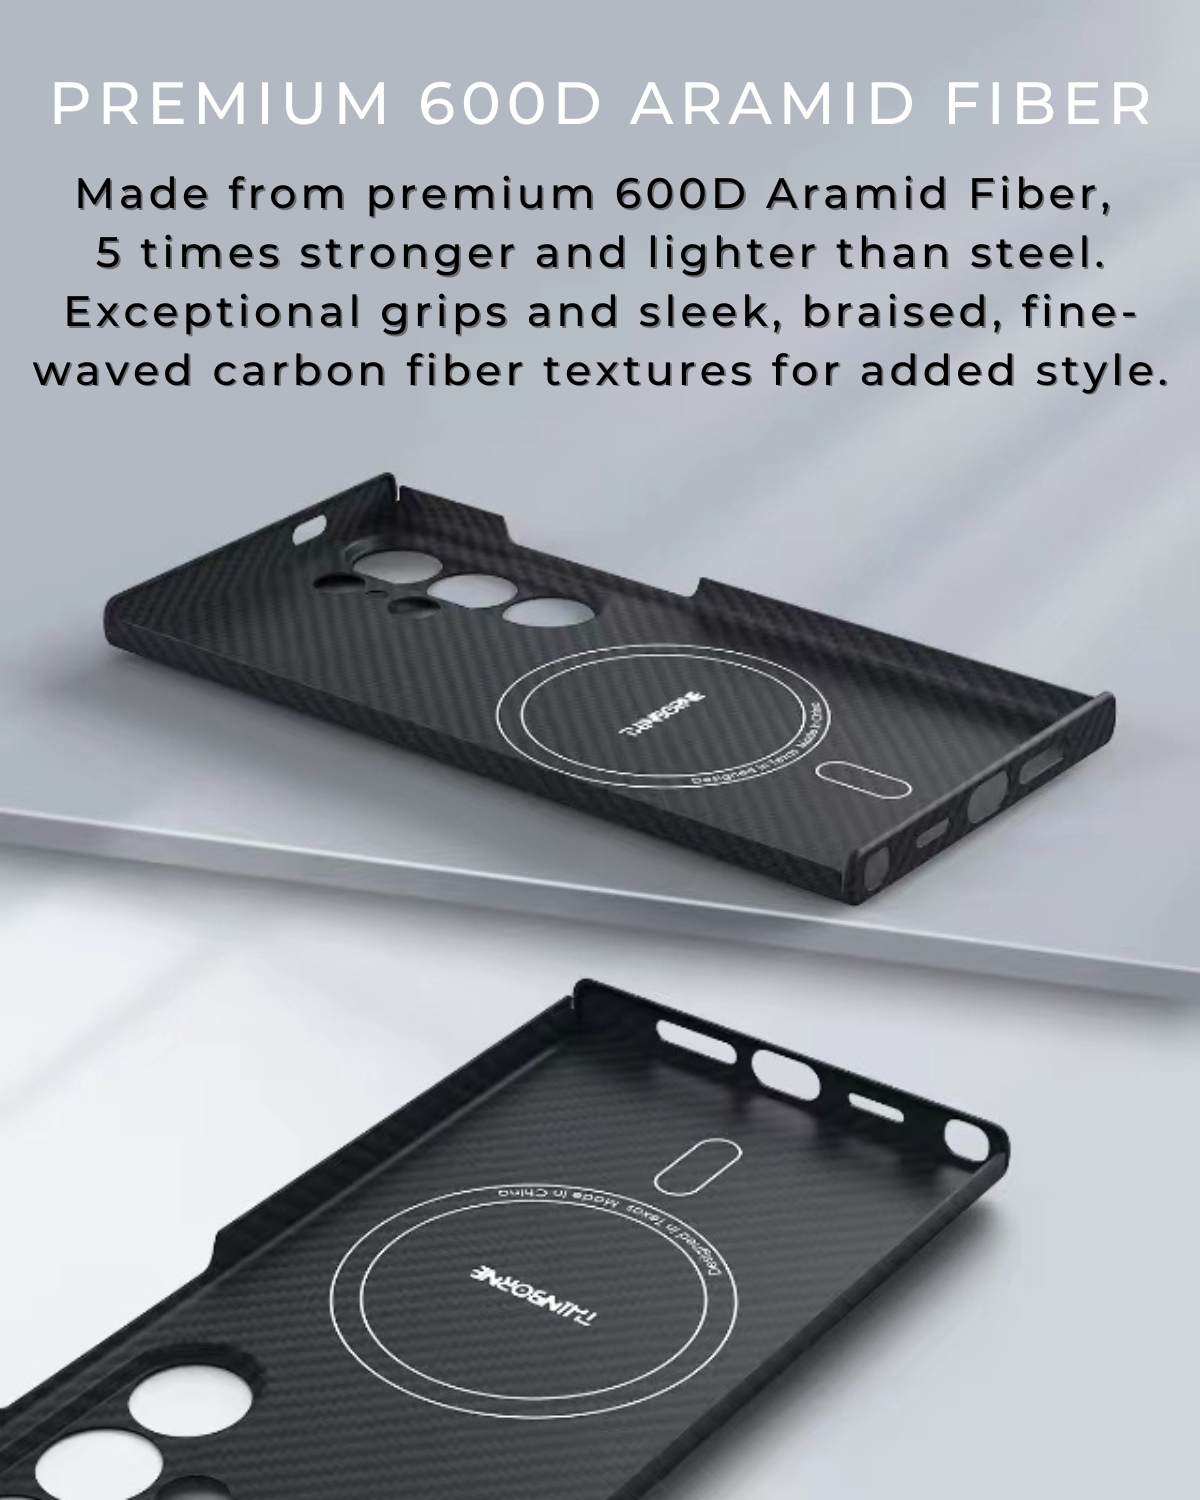 SHOWING THE SAMSUNG GALAX S24 ULTRA IS MADE OF 600D ARAMID FIEBR